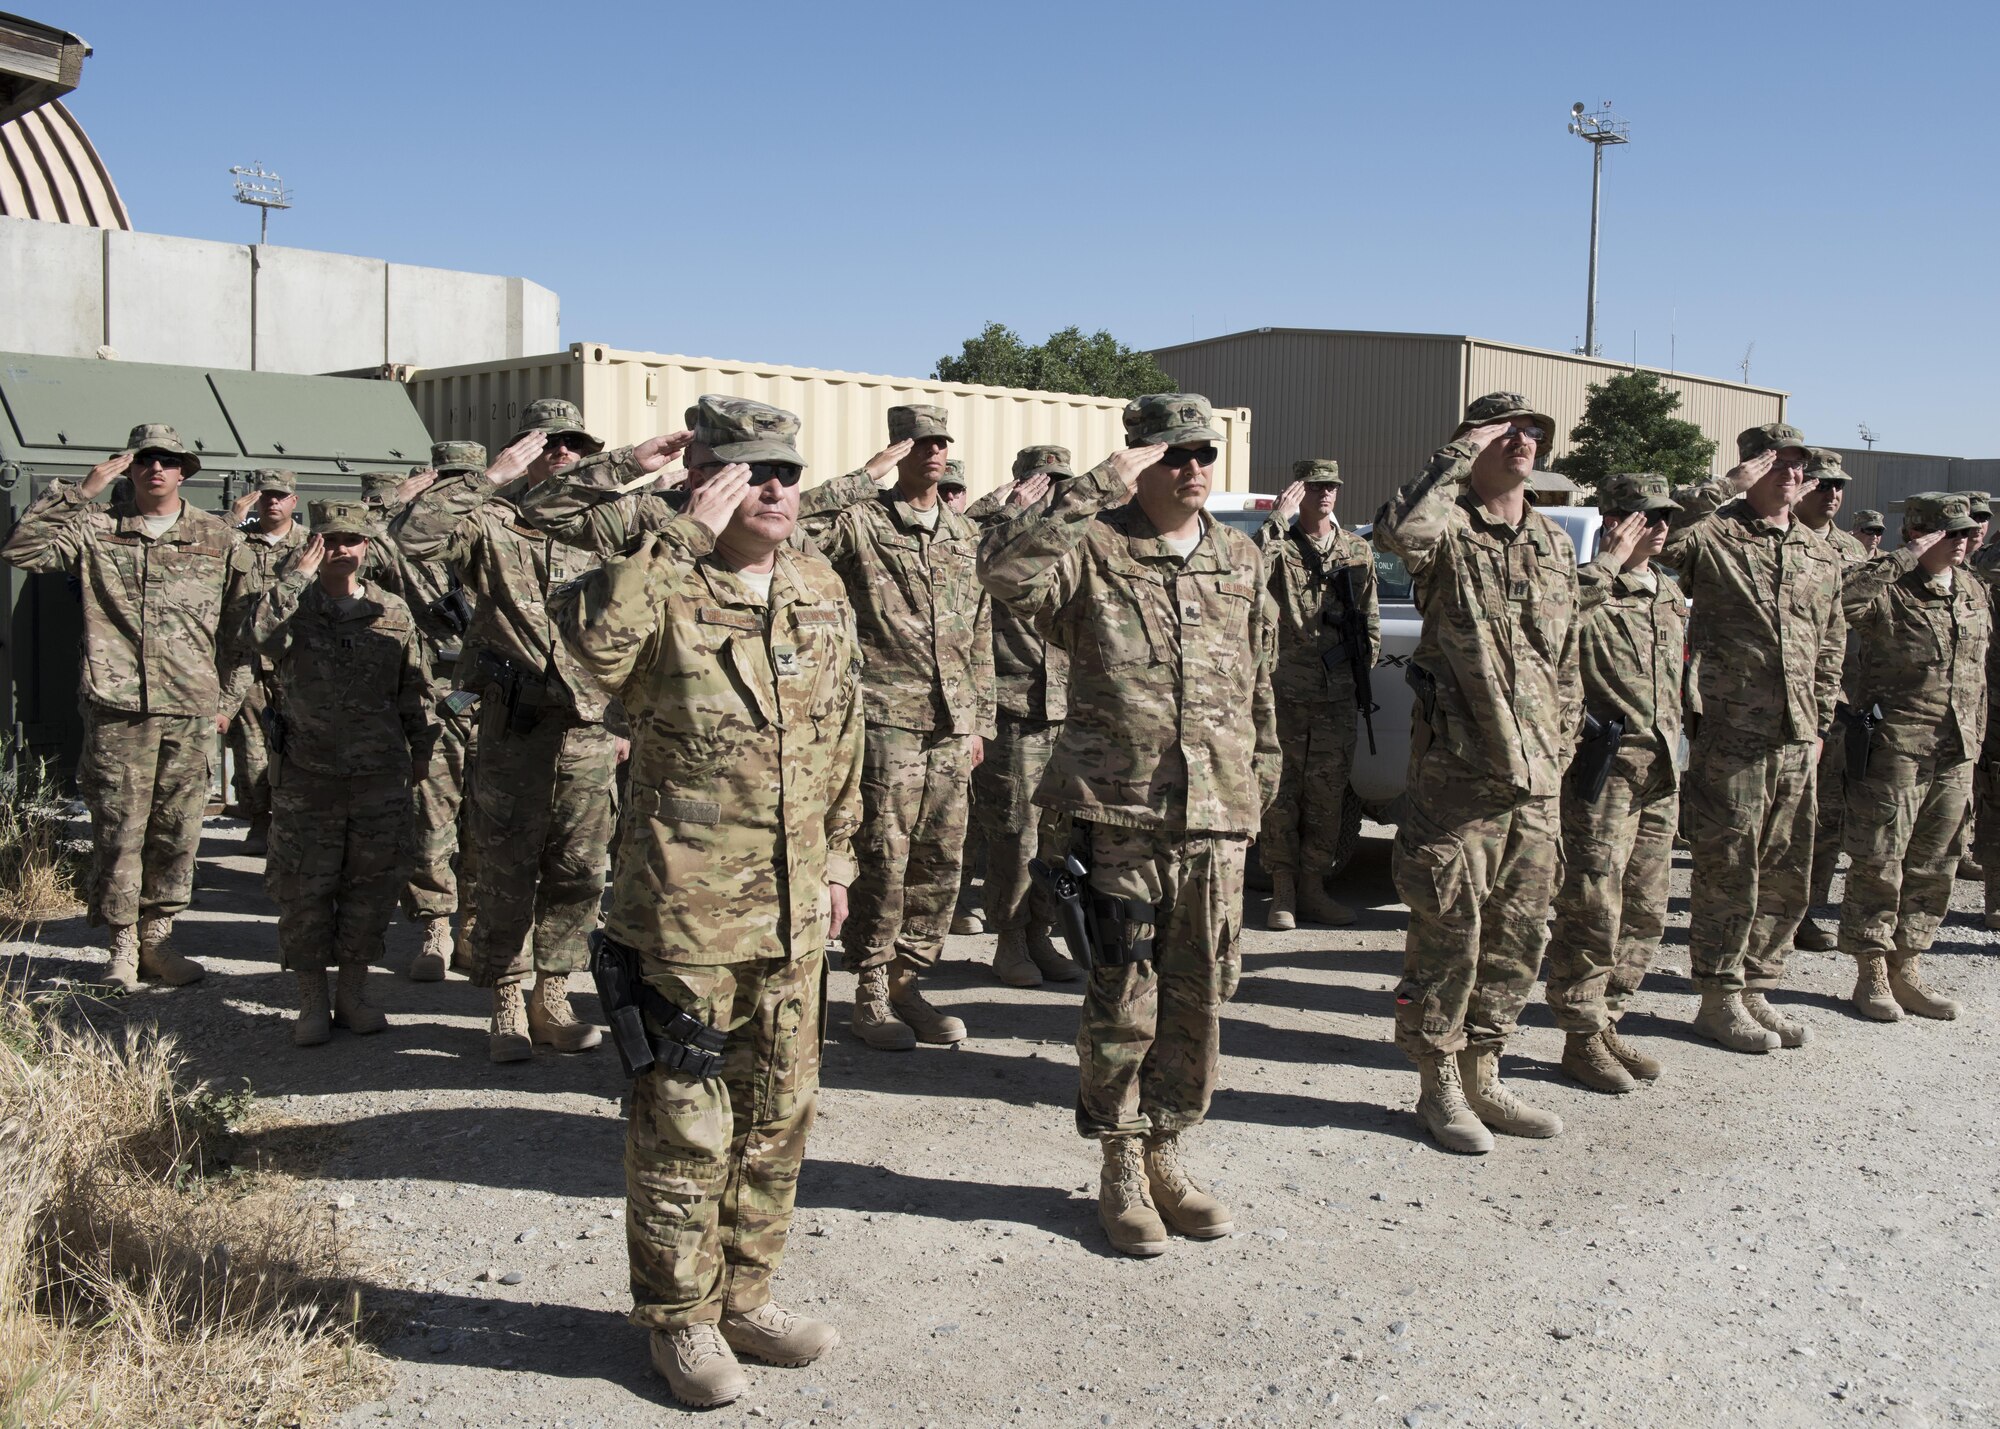 Col. Patrick Schlichenmeyer, 455th Air Expeditionary Wing vice commander and Airmen from across the 455th AEW, render a salute during the Memorial Day remembrance ceremony at Bagram Airfield, Afghanistan, May 30, 2016. The ceremony was held in honor of those who paid the ultimate price in service to the United States. (U.S. Air Force photo by Tech. Sgt. Tyrona Lawson)